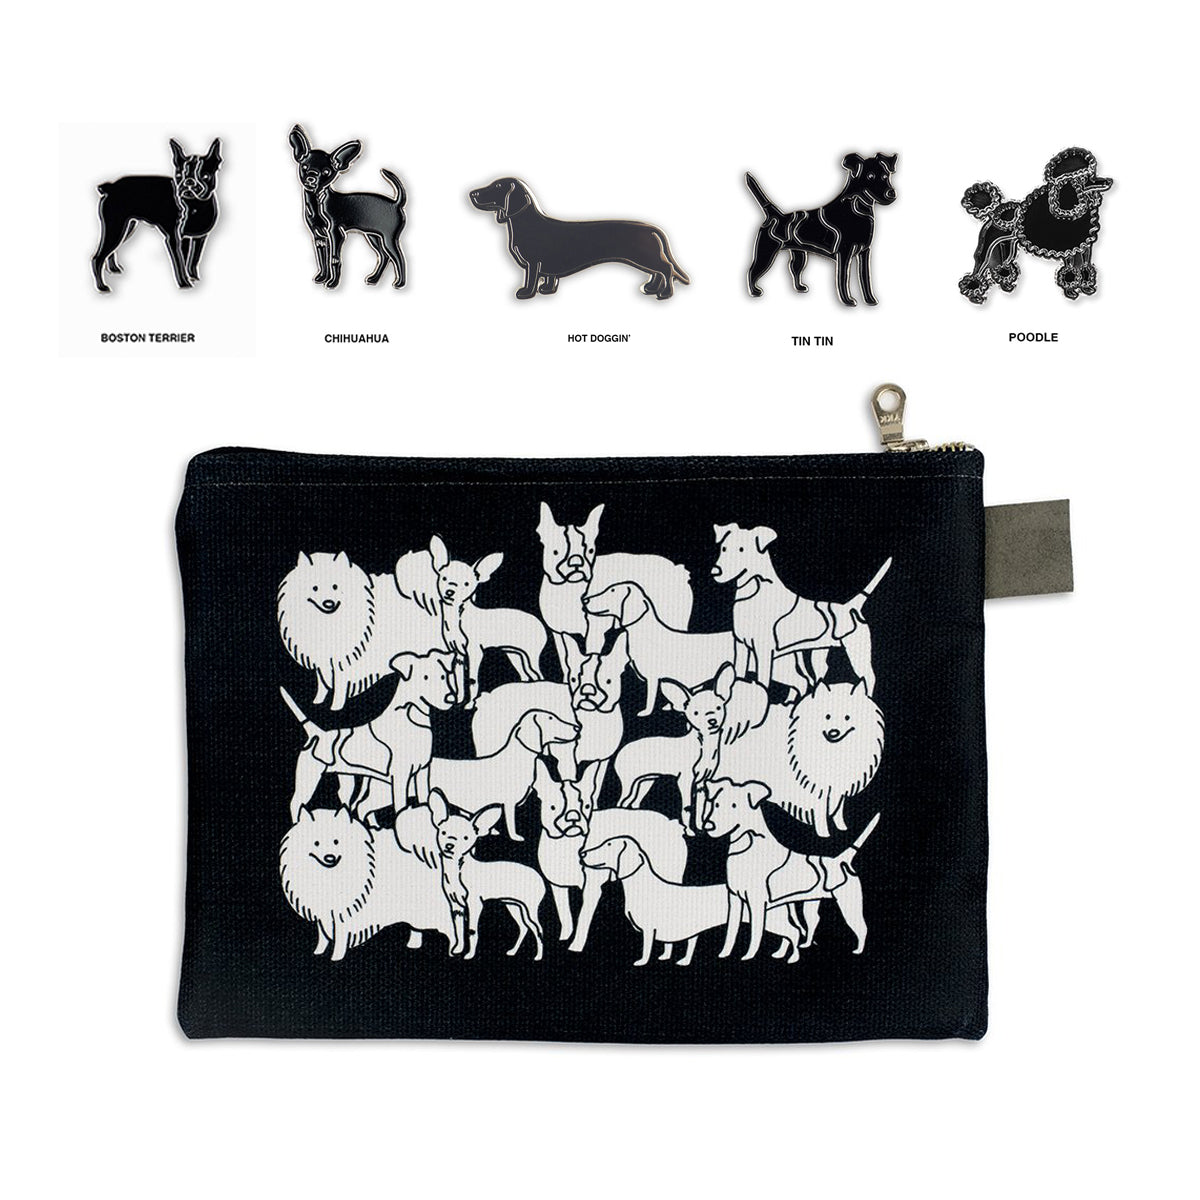 black zip case with various illustrations of different dog breeds mixed together in white and assorted dog enamel pins